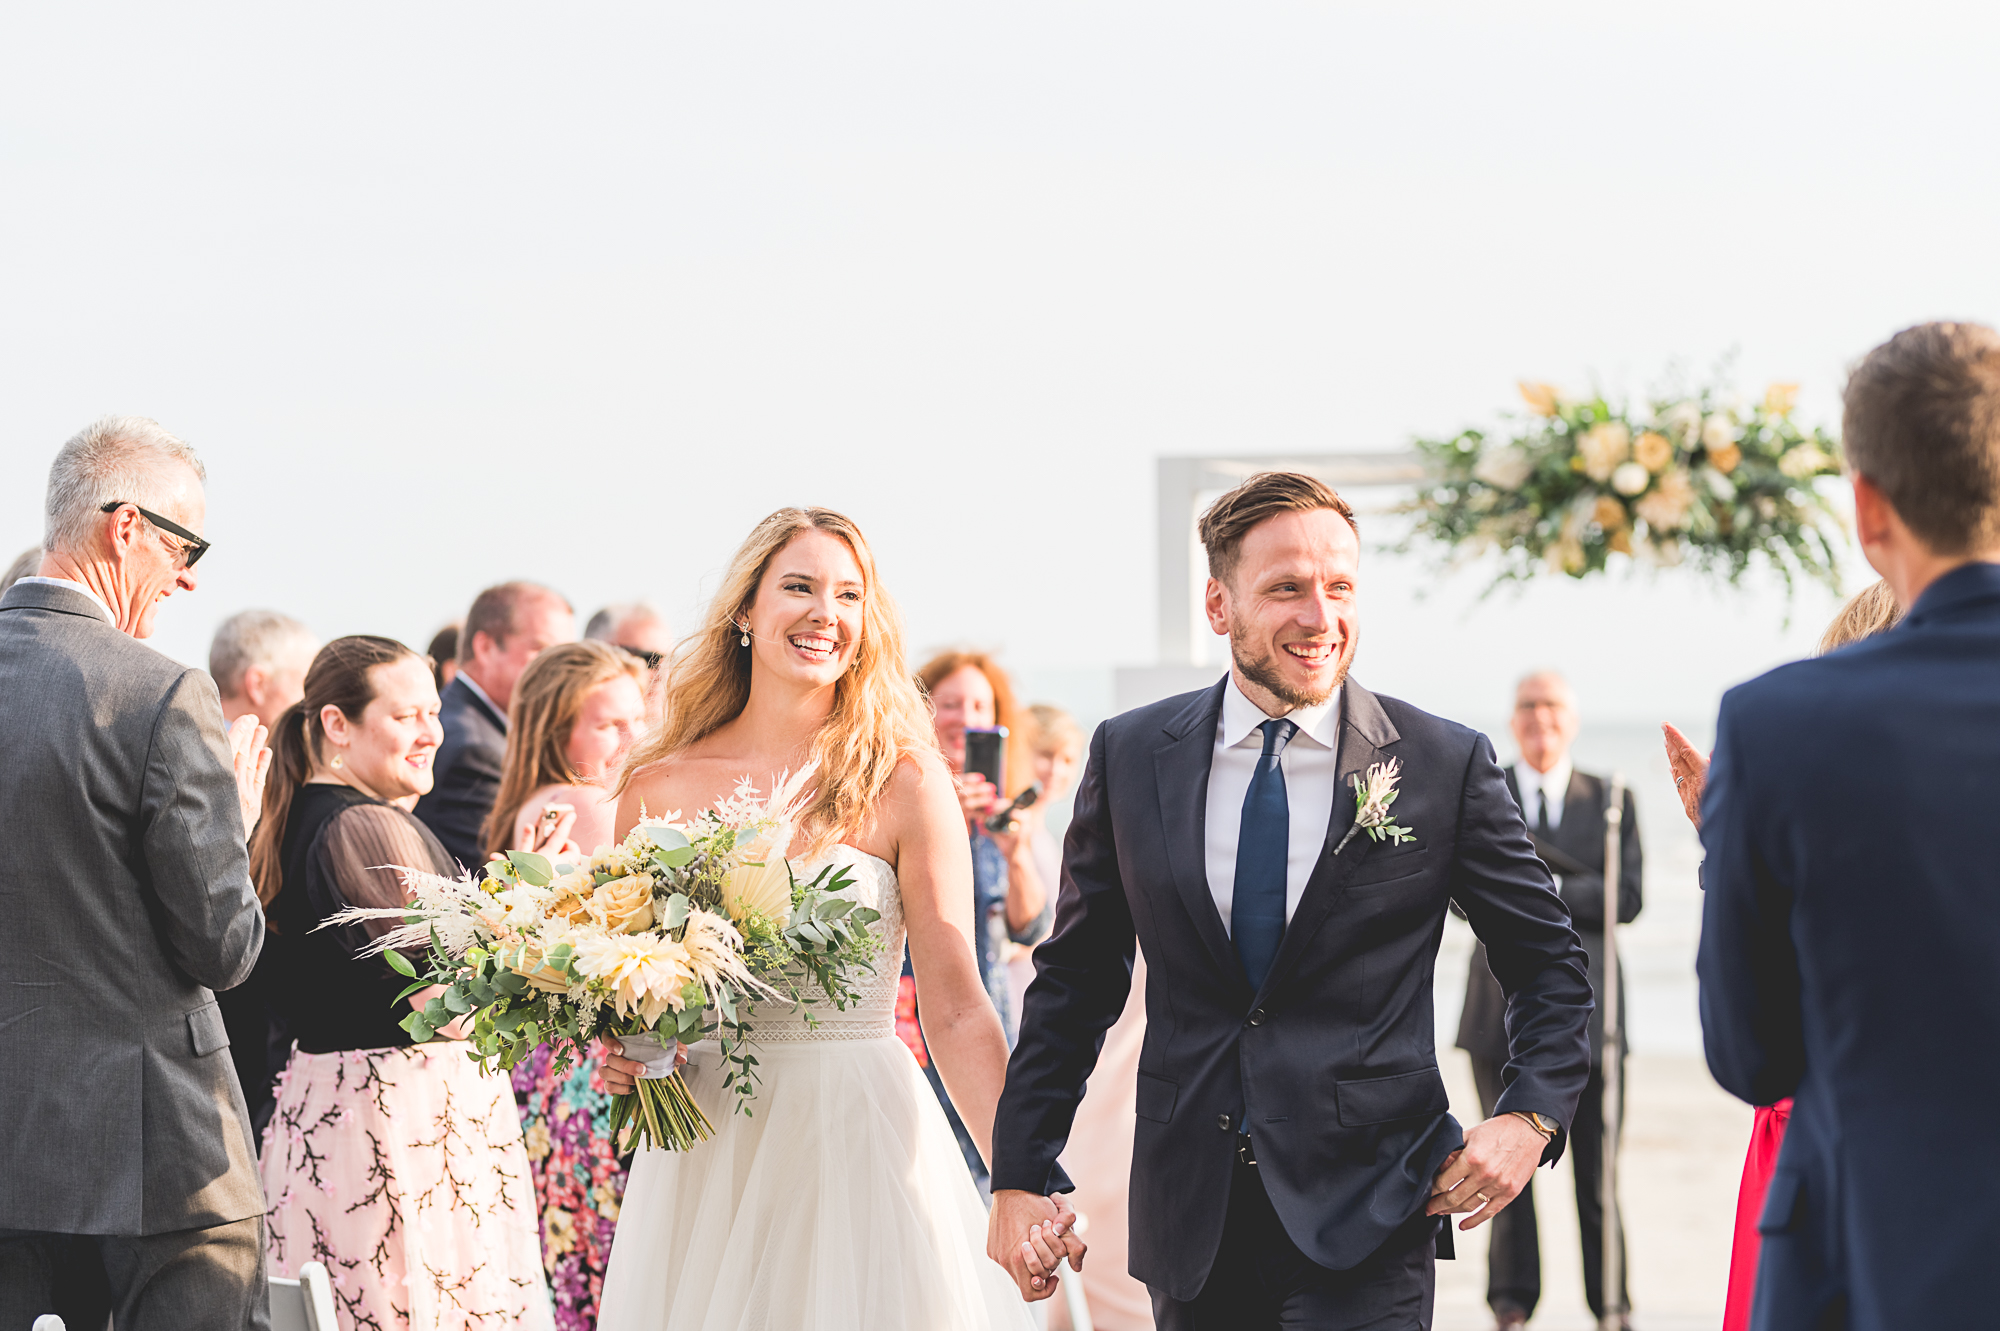 Wedding ceremony at Newport Beach House: A Longwood Venue in Newport, RI. Bride and groom smiling as they walk down the aisle holding hands.